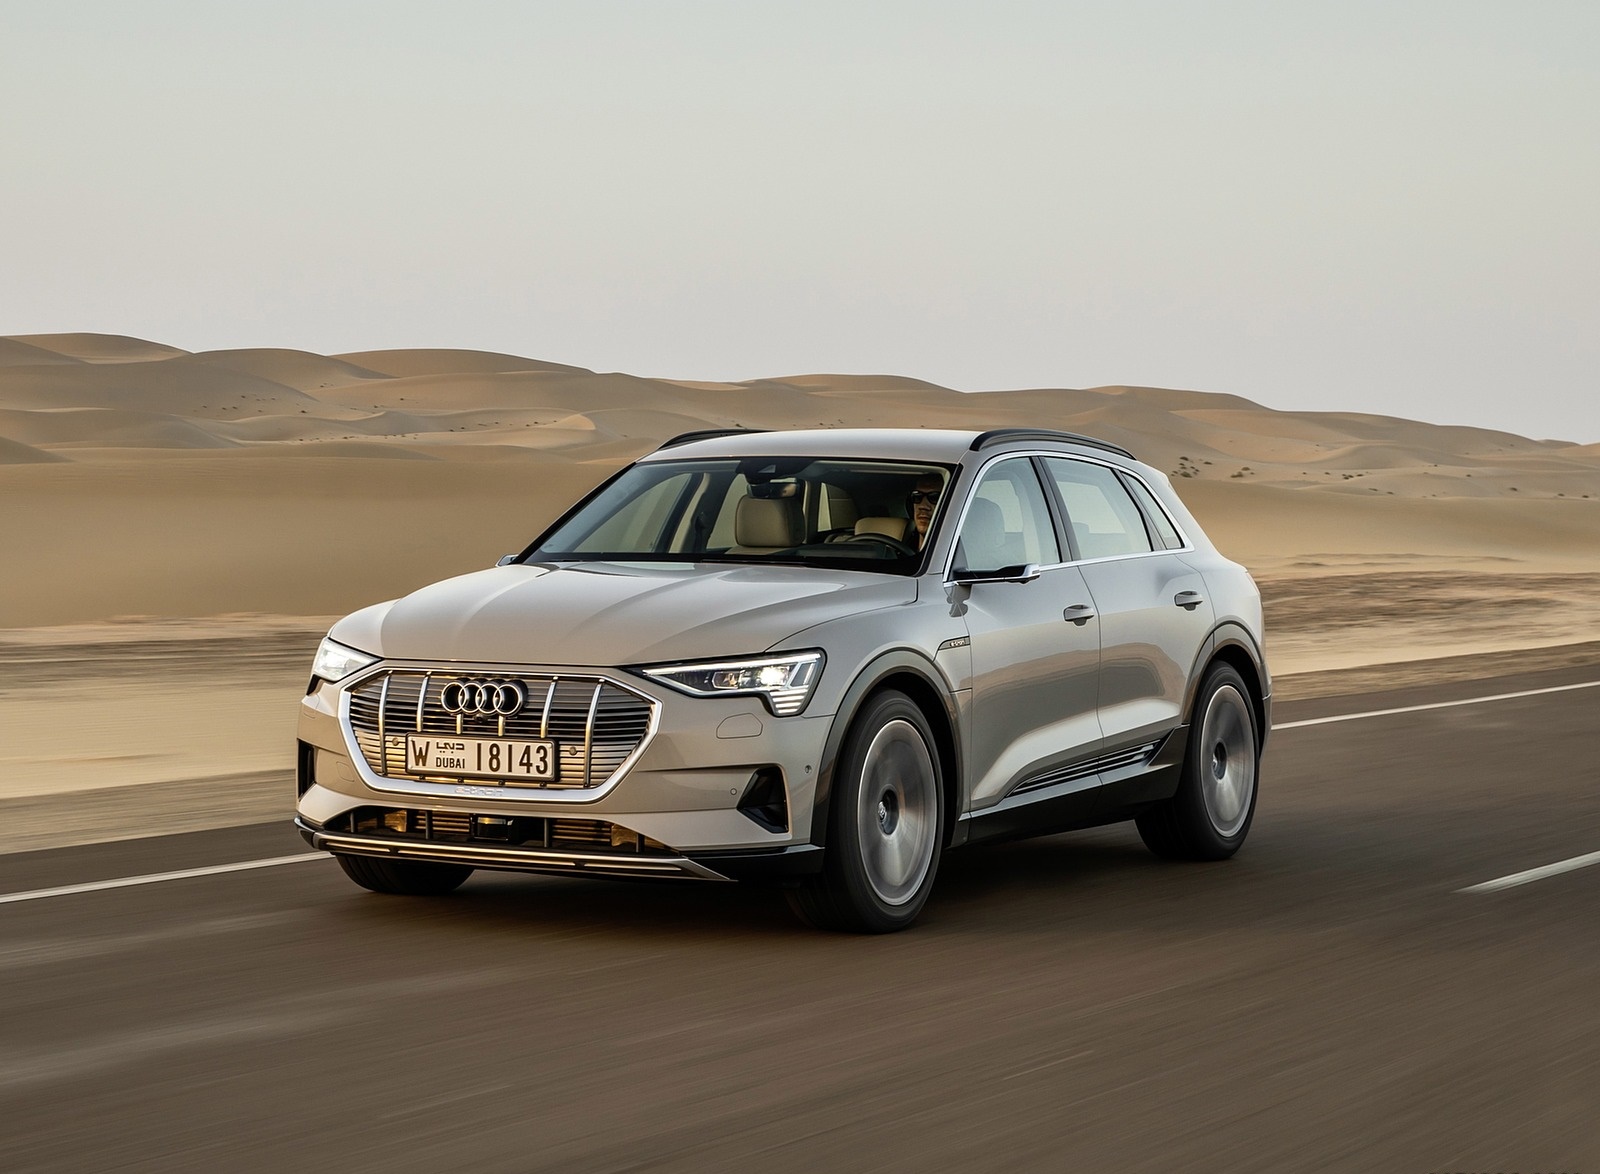 2019 Audi e-tron (Color: Siam Beige) Front Three-Quarter Wallpapers #140 of 234